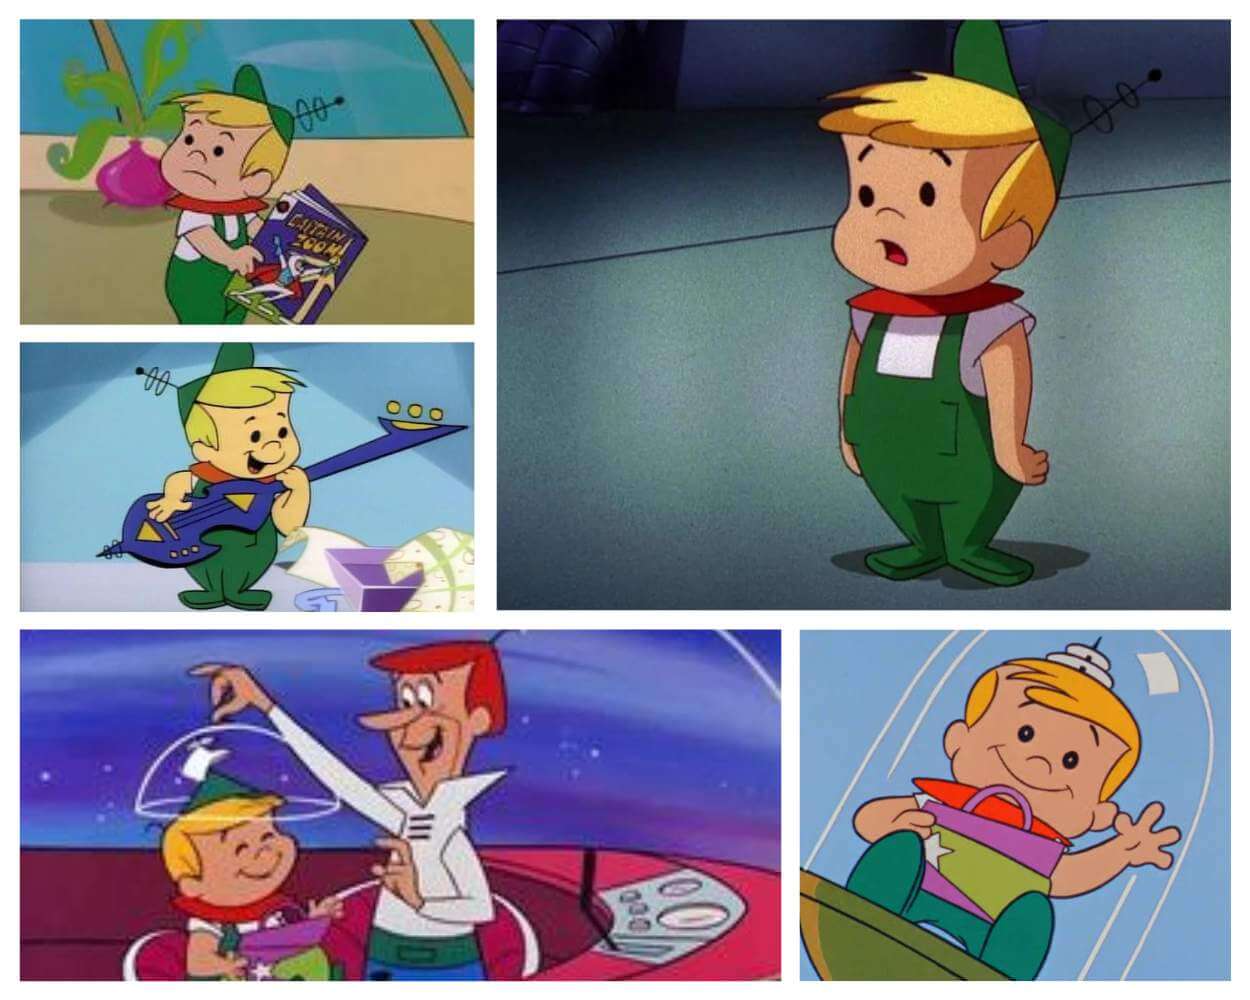 Elroy Jetsons Adventures A Glimpse into the Future